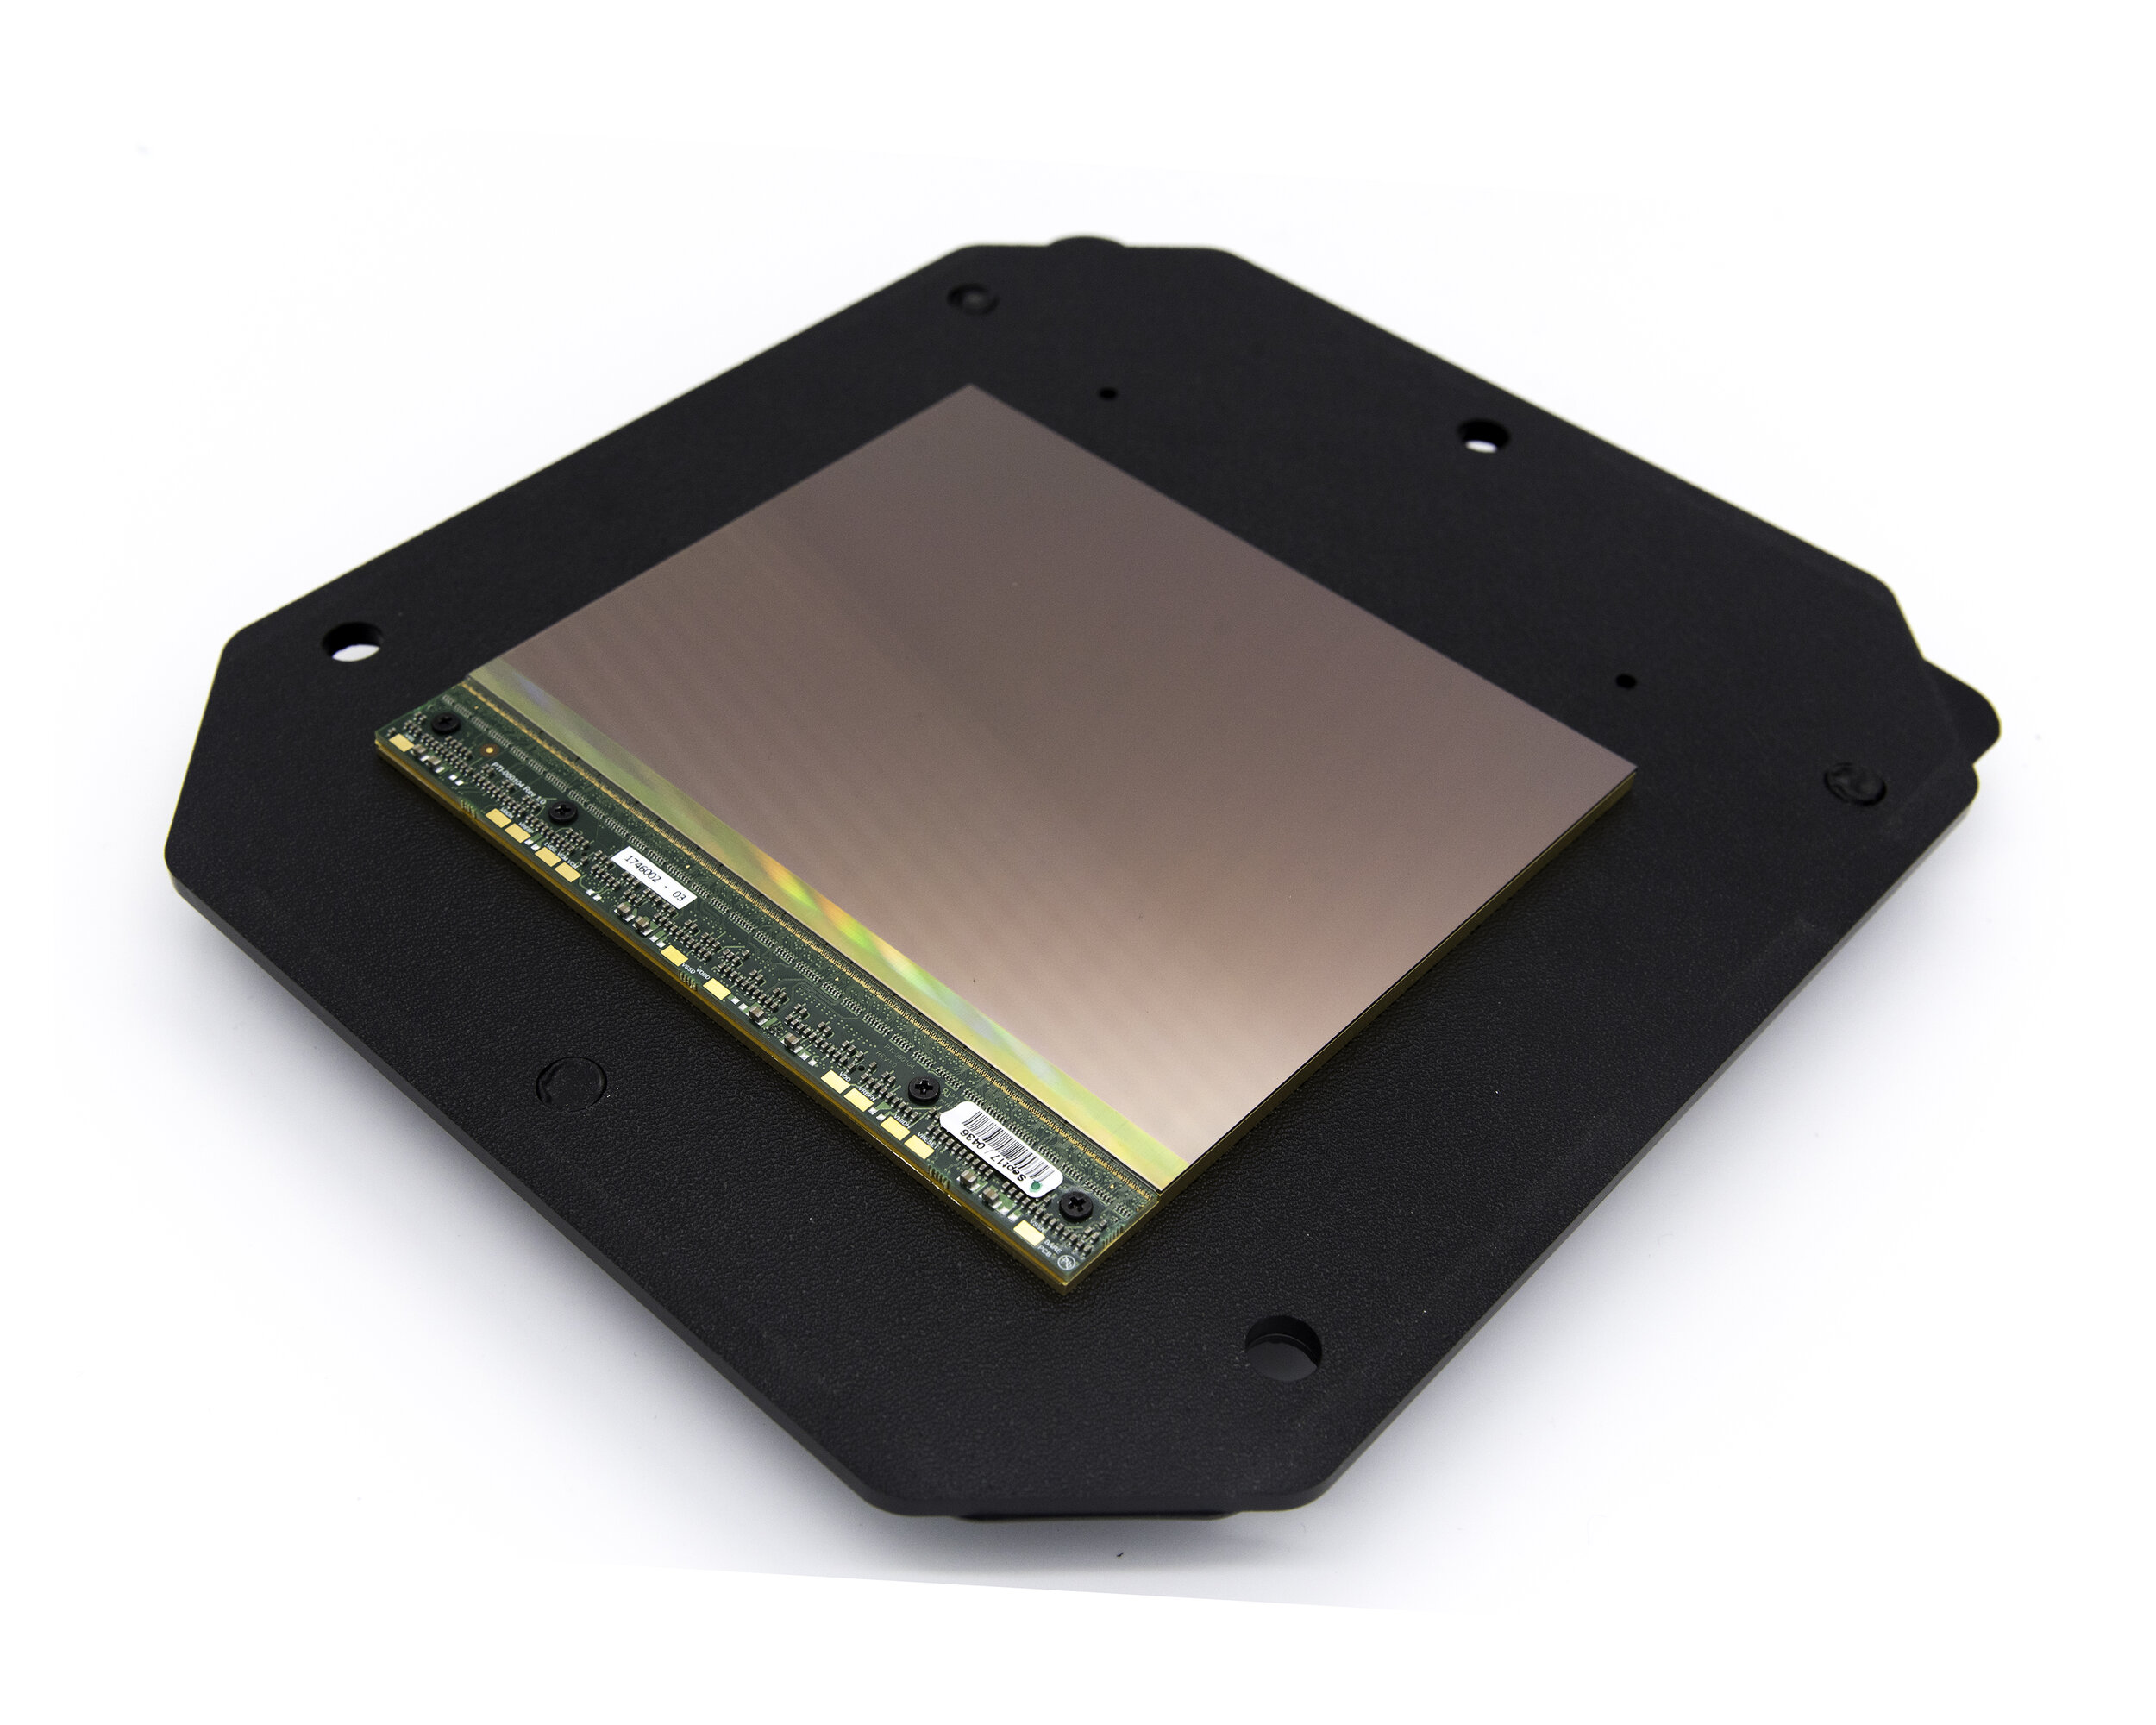 Cerberus CMOS Image Sensor - link to Standard CMOS products page